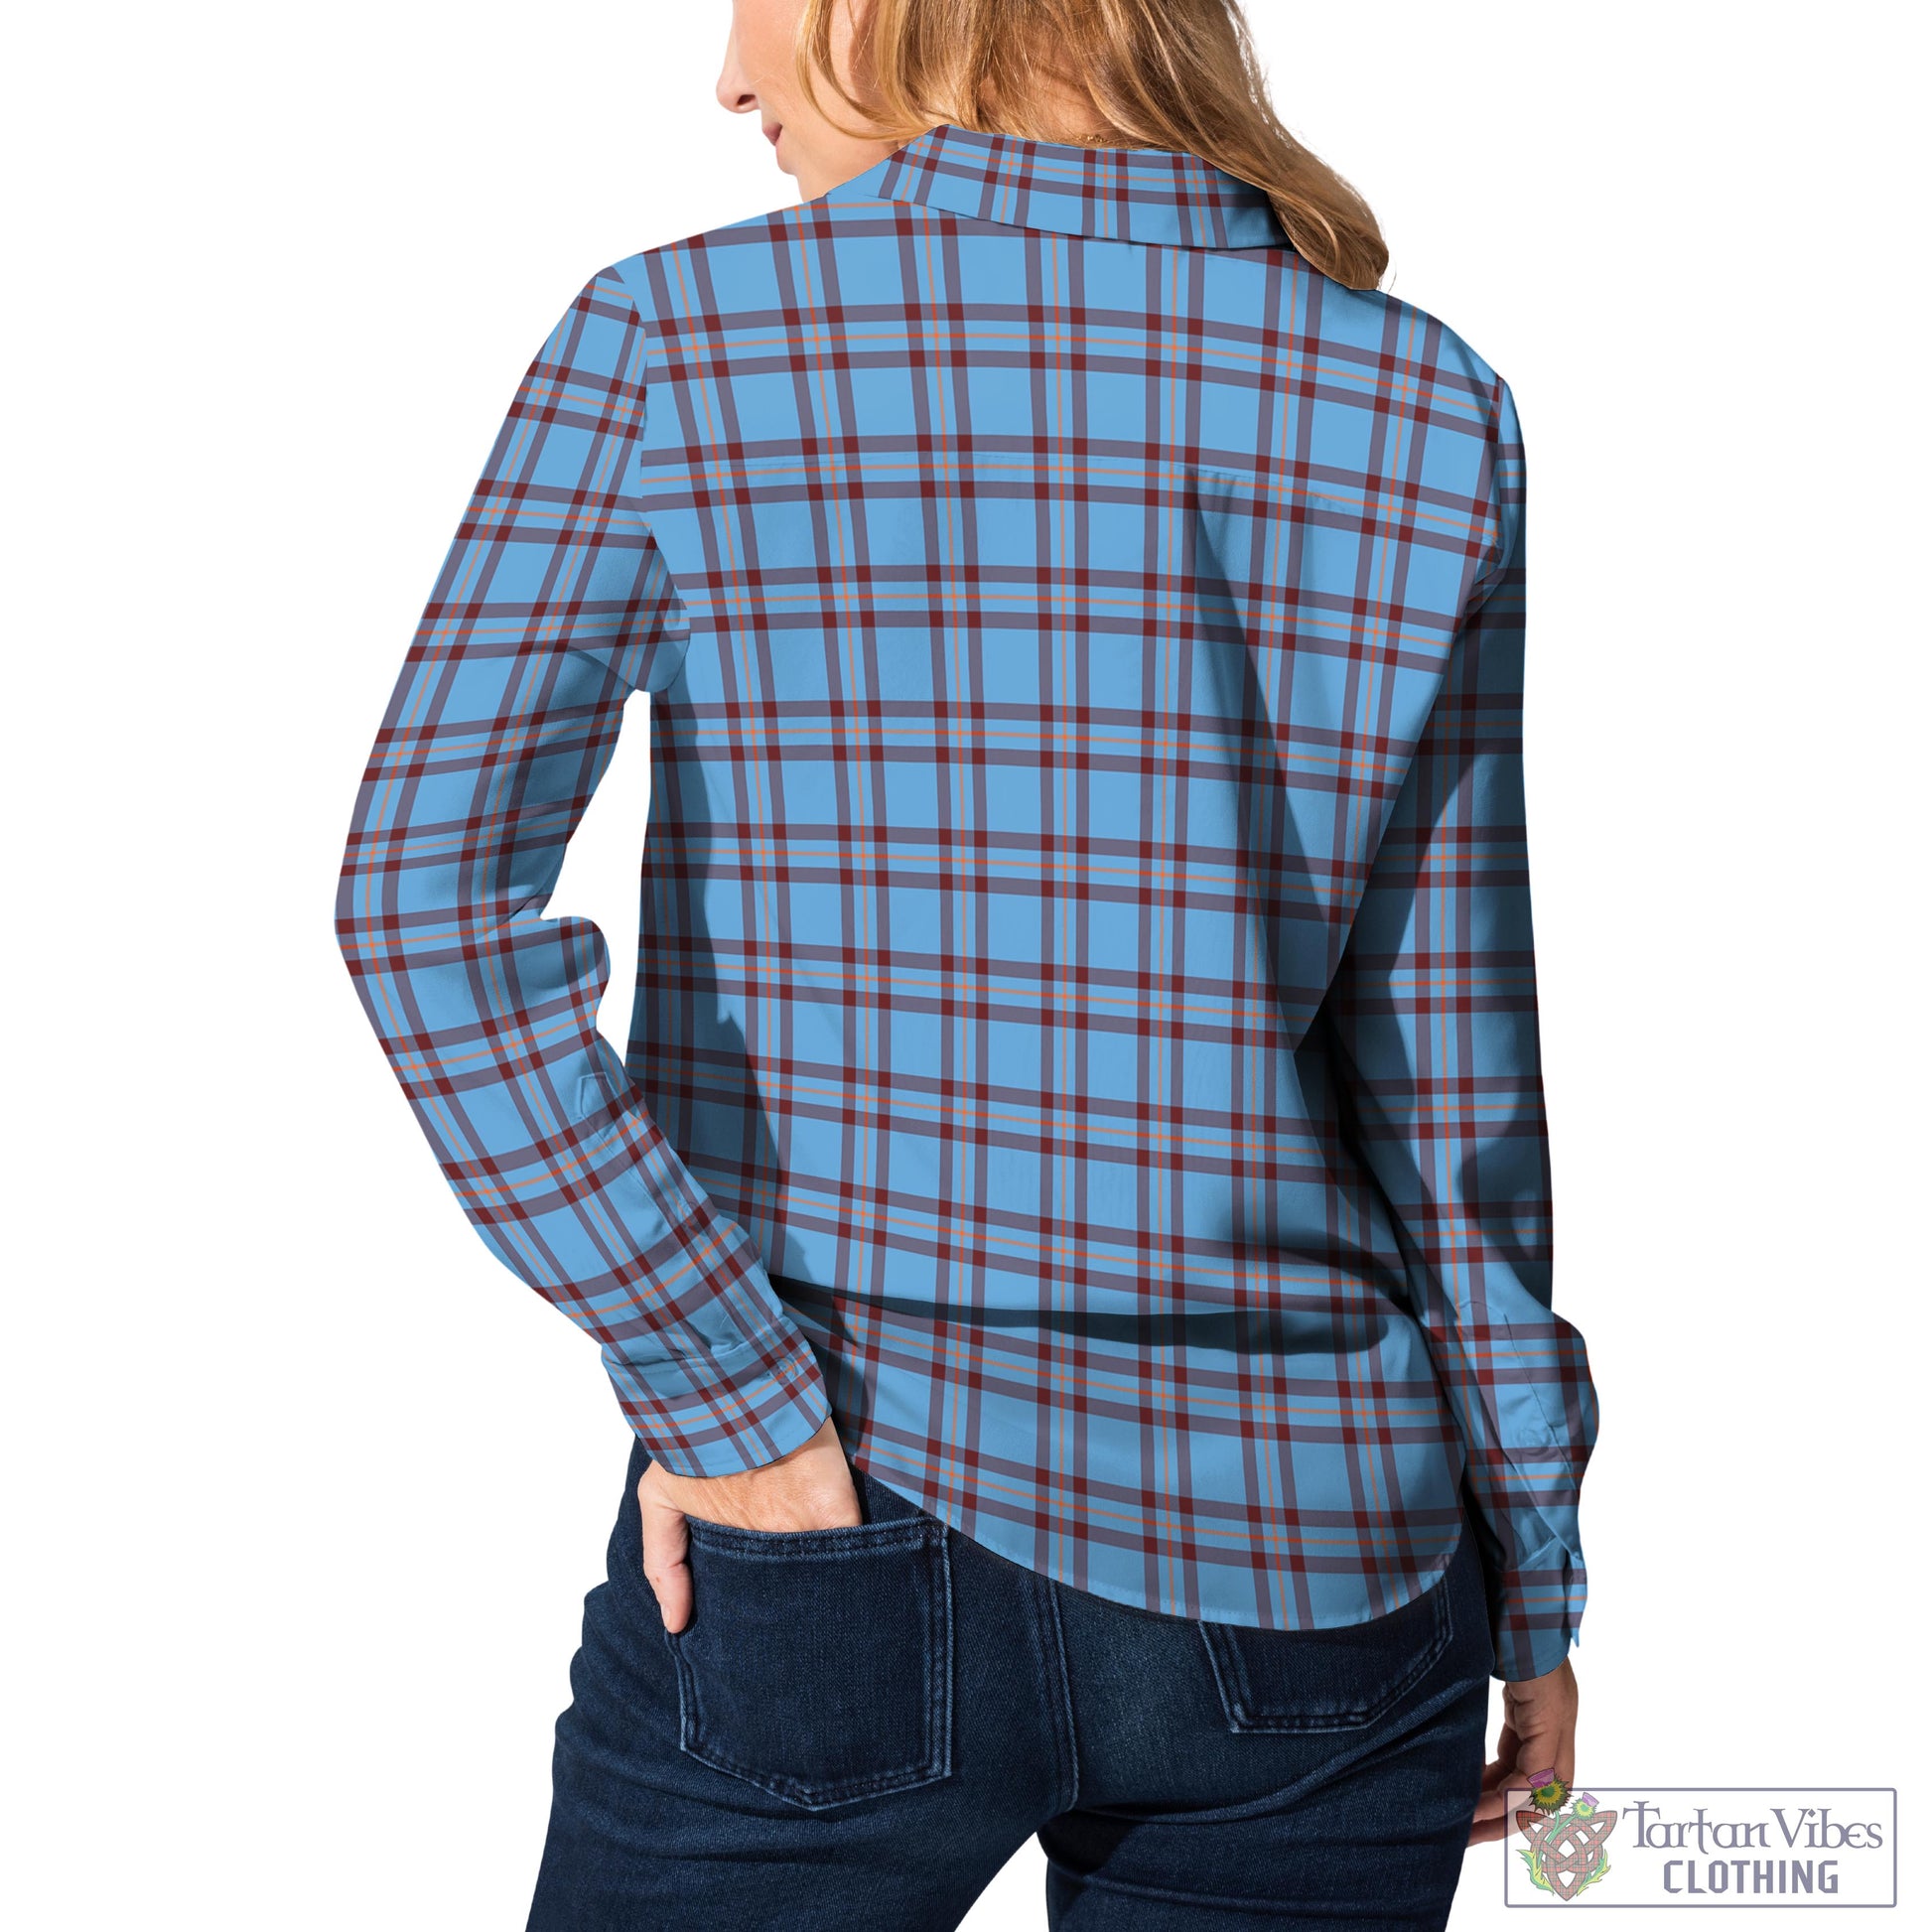 Tartan Vibes Clothing Elliot Ancient Tartan Womens Casual Shirt with Family Crest